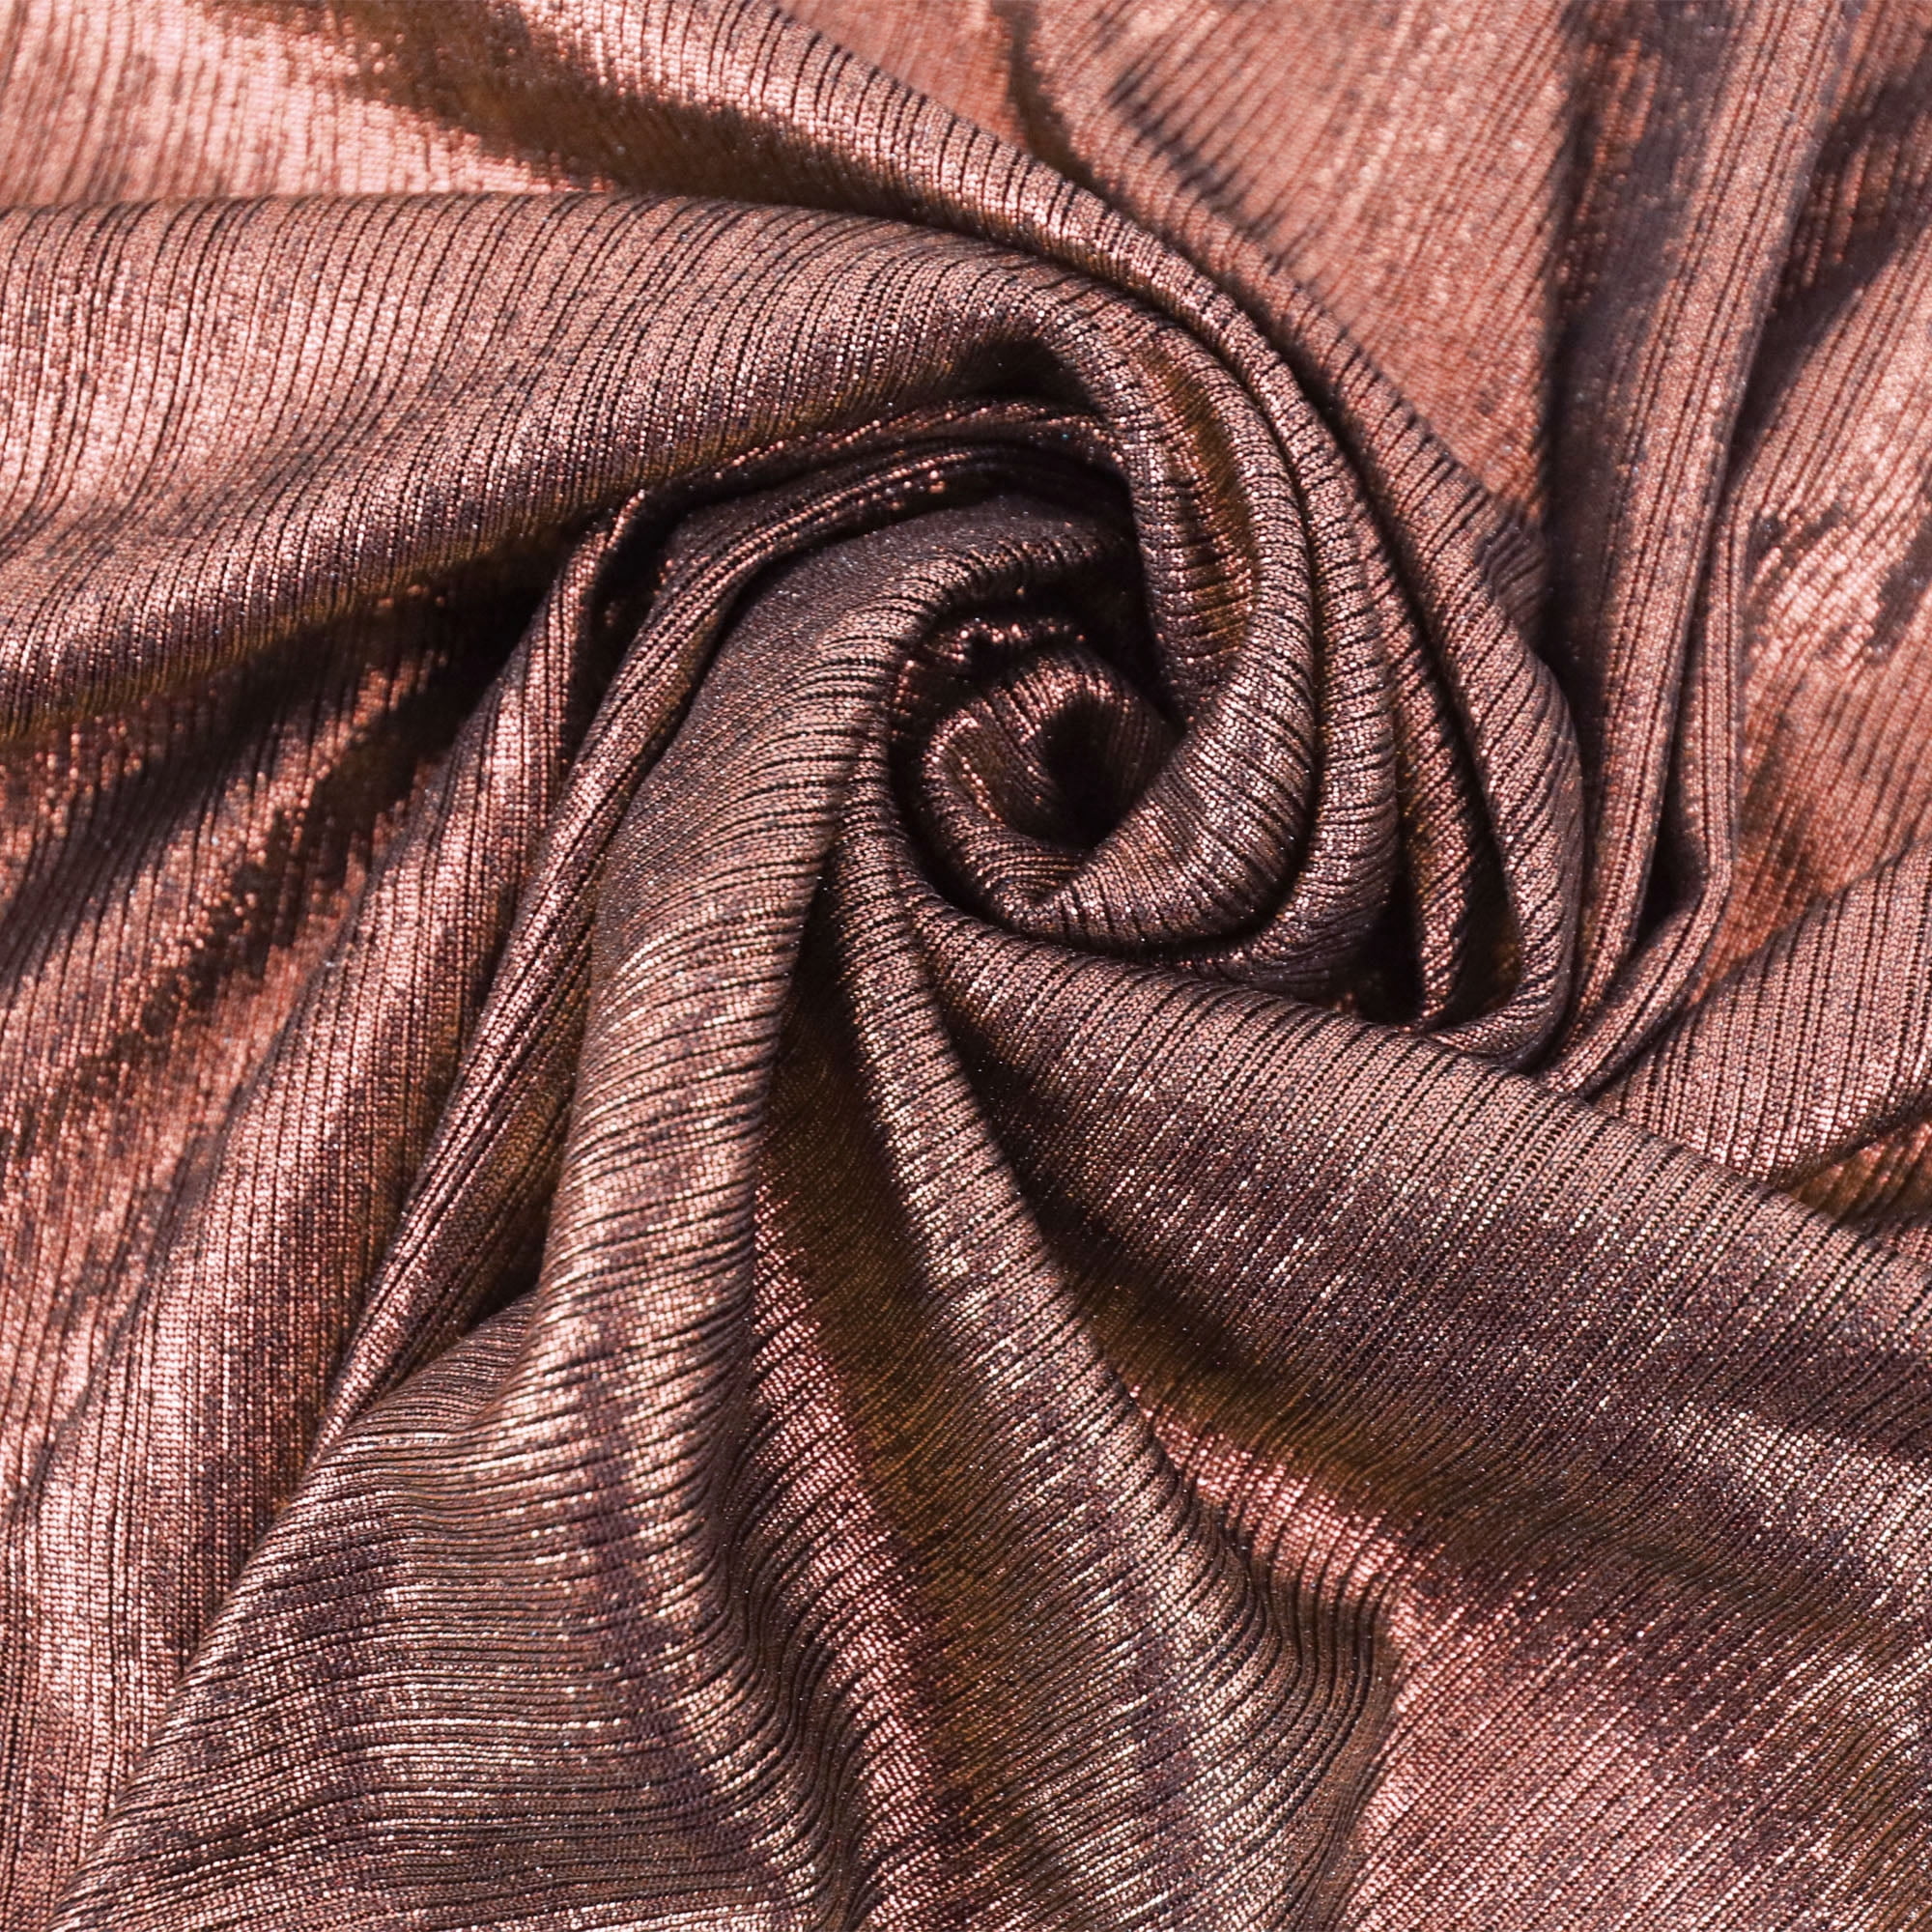 Rose Gold Deluxe Shiny Polyester Spandex Fabric Stretch 58 Wide